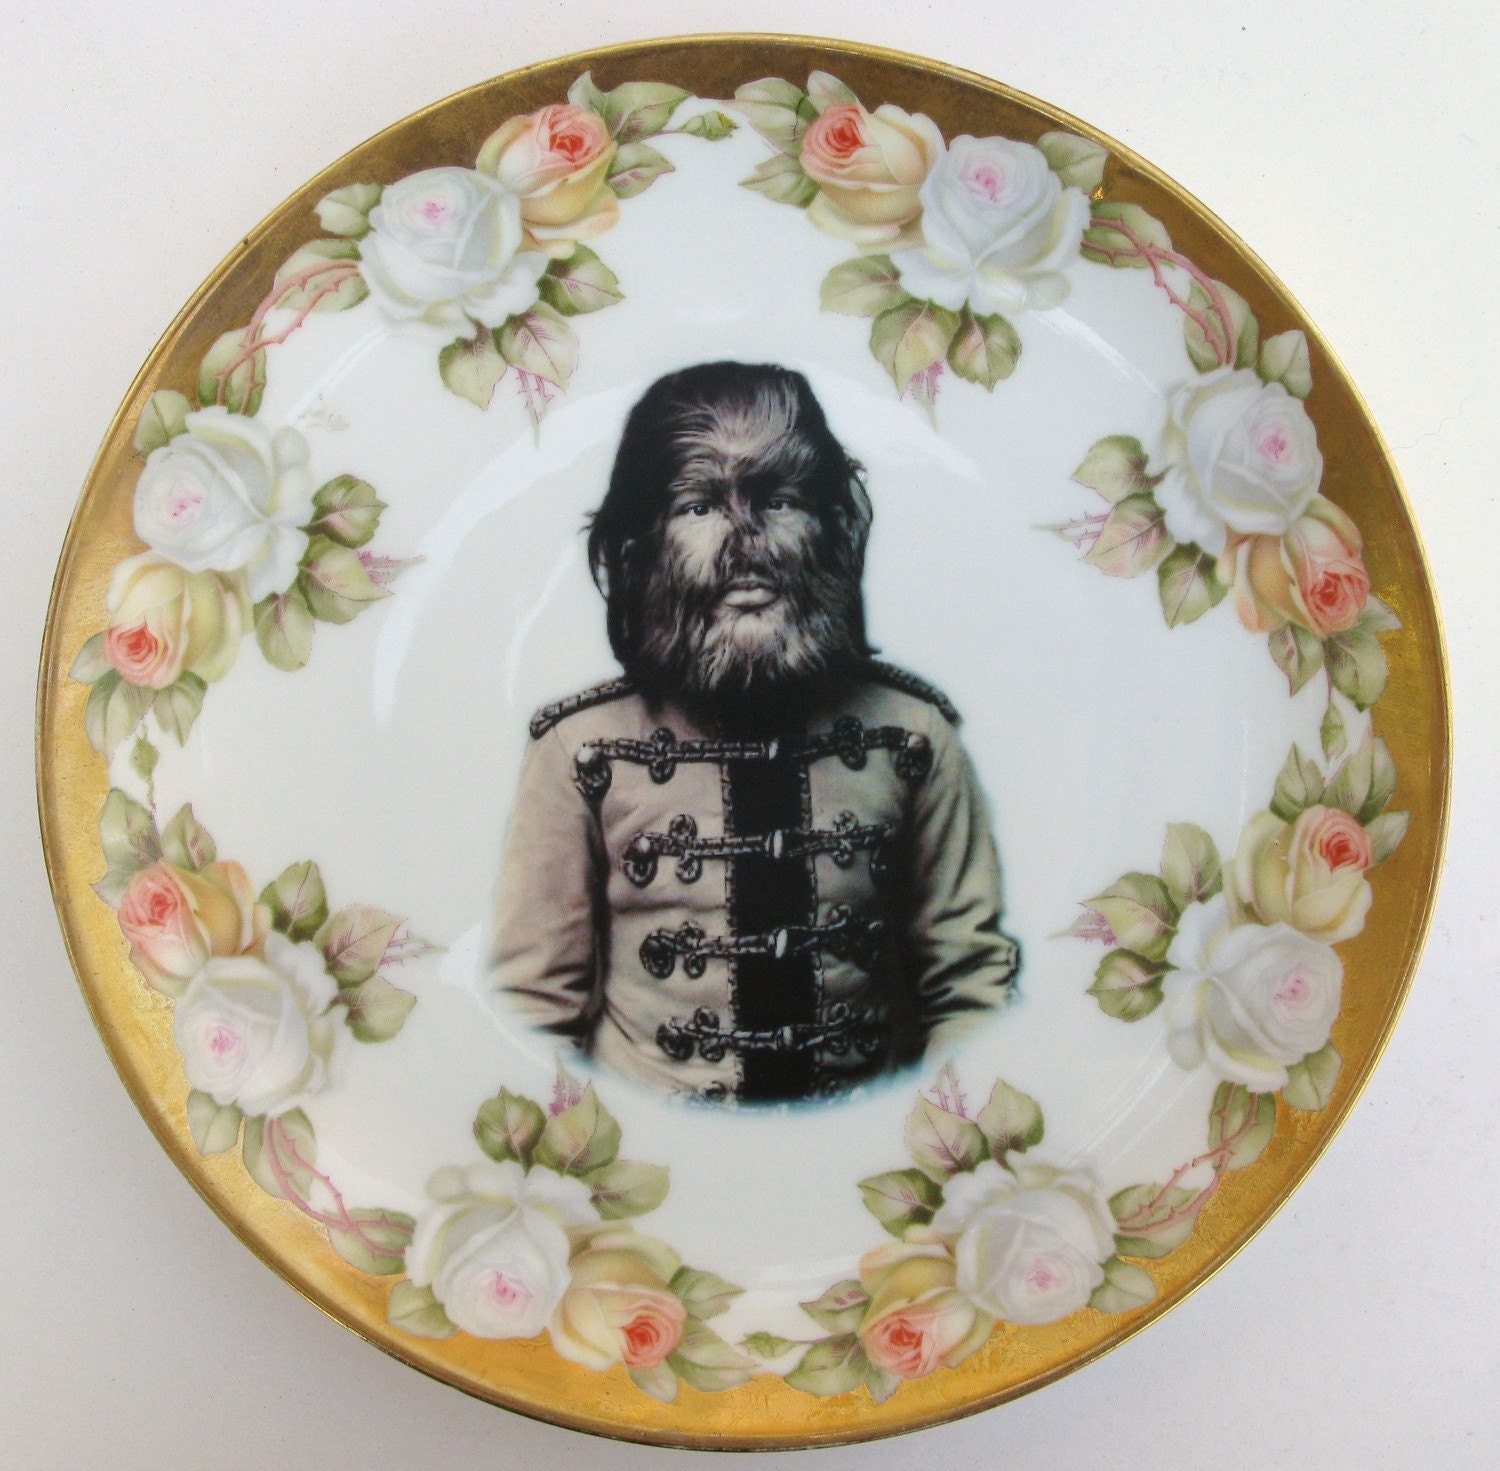 JoJo The Dog Faced Boy - Altered Antique Plate